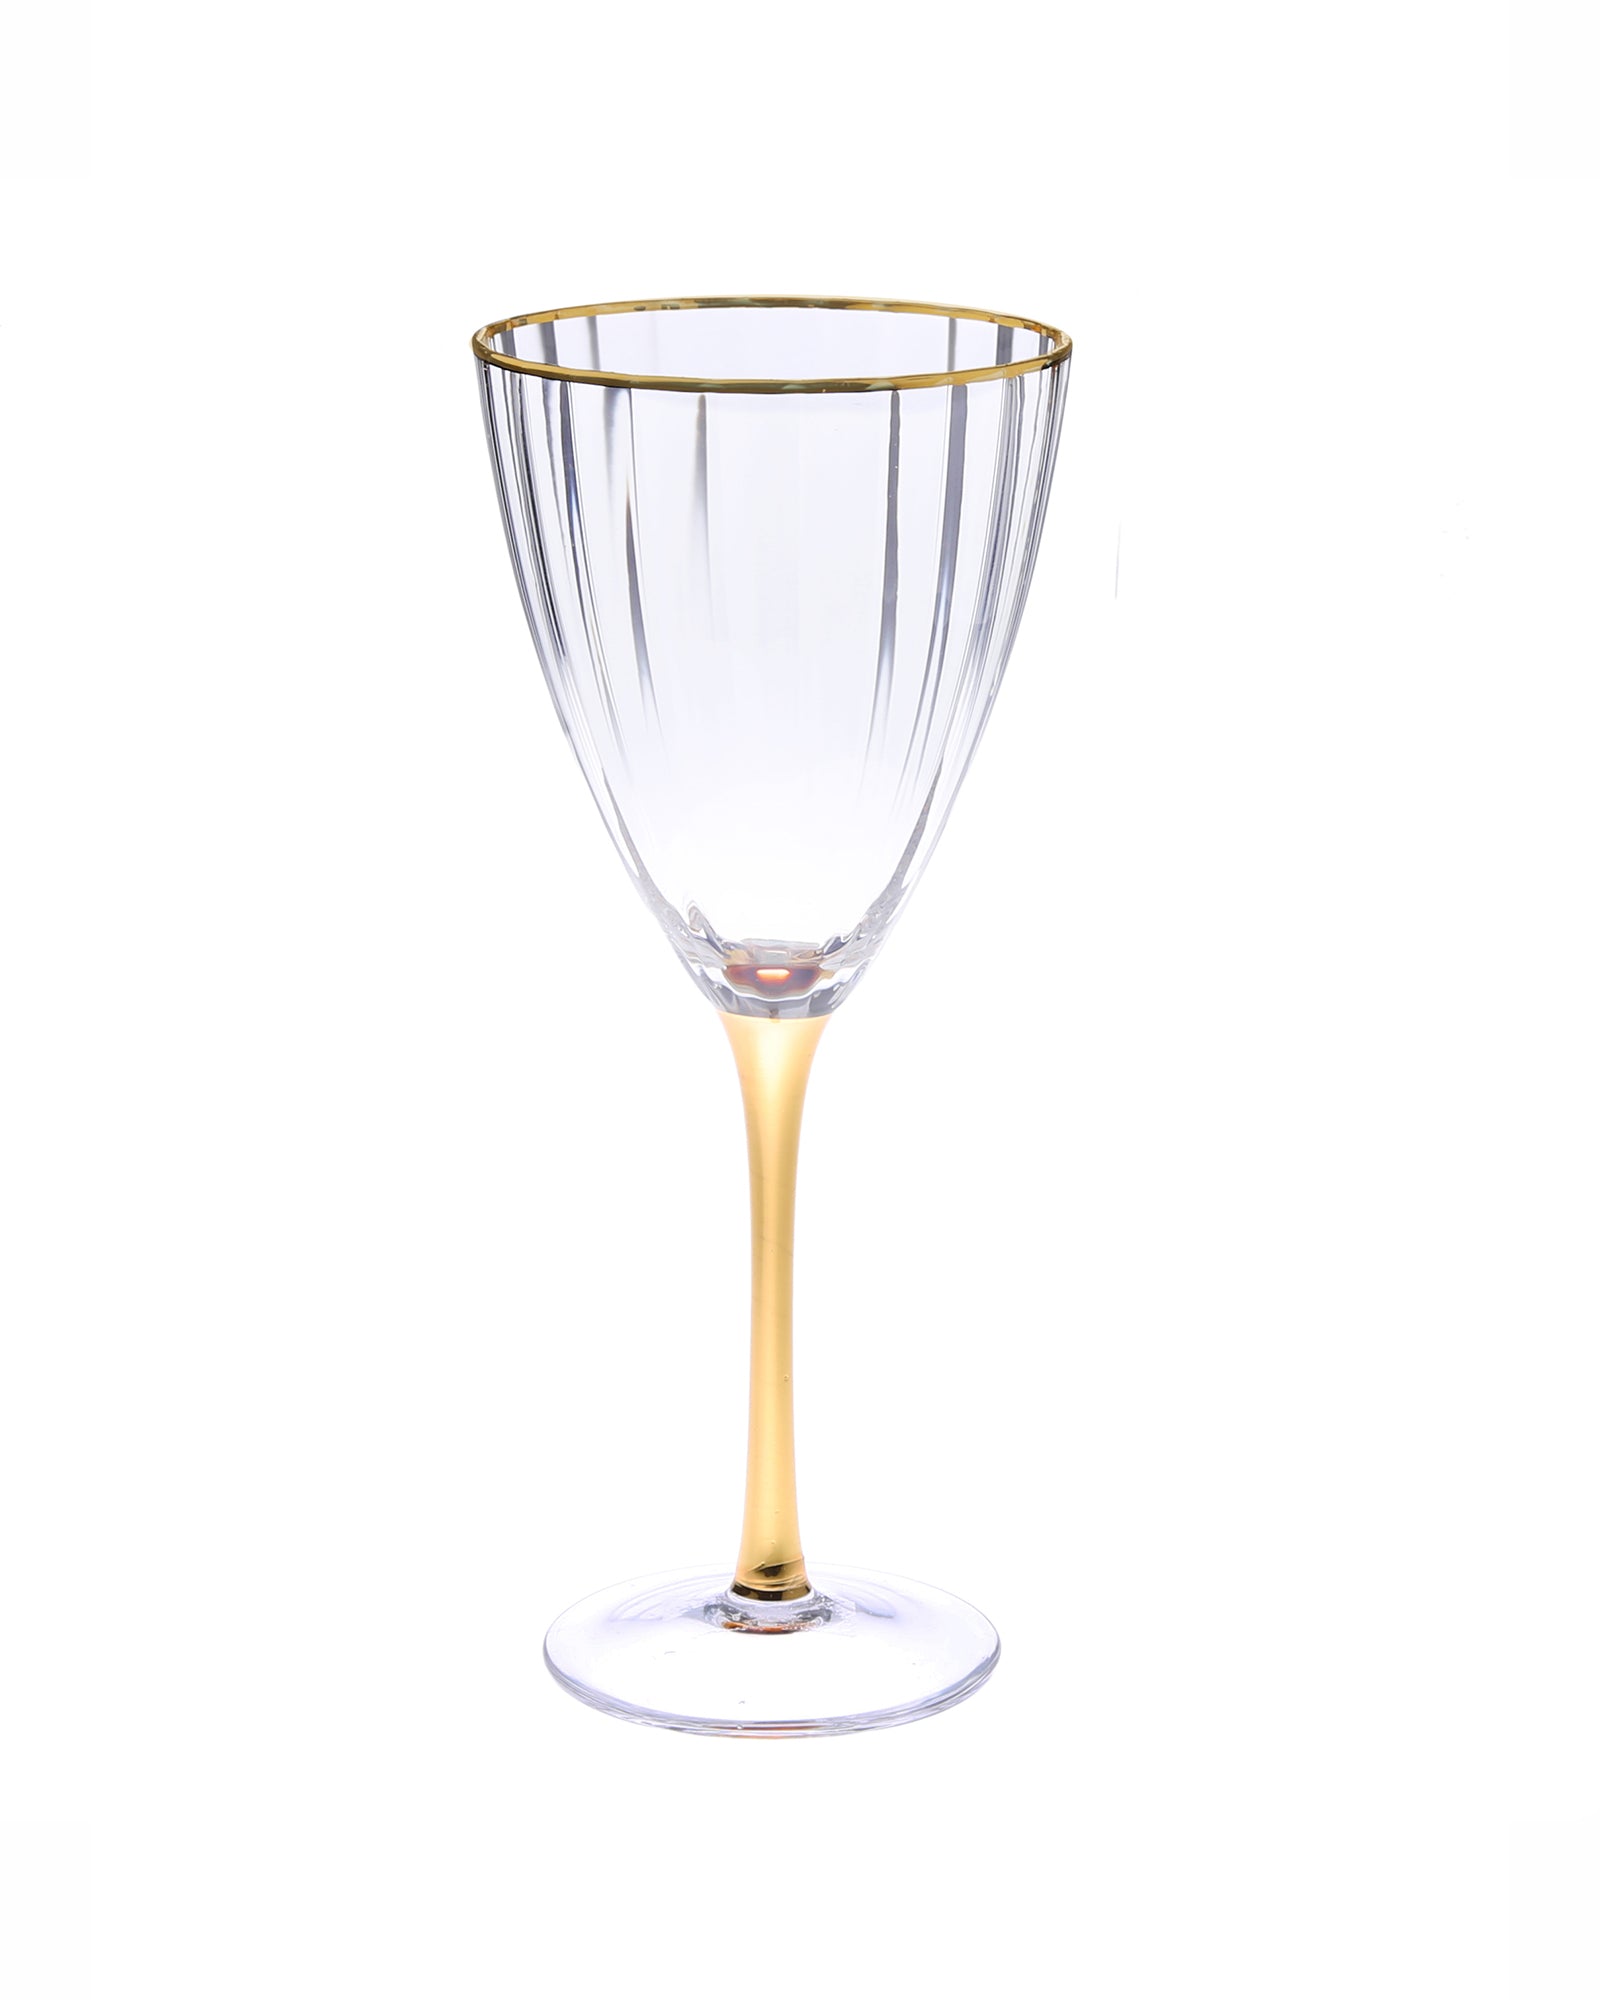 Set of 6 White Square Shaped Wine Glasses with Gold Rim